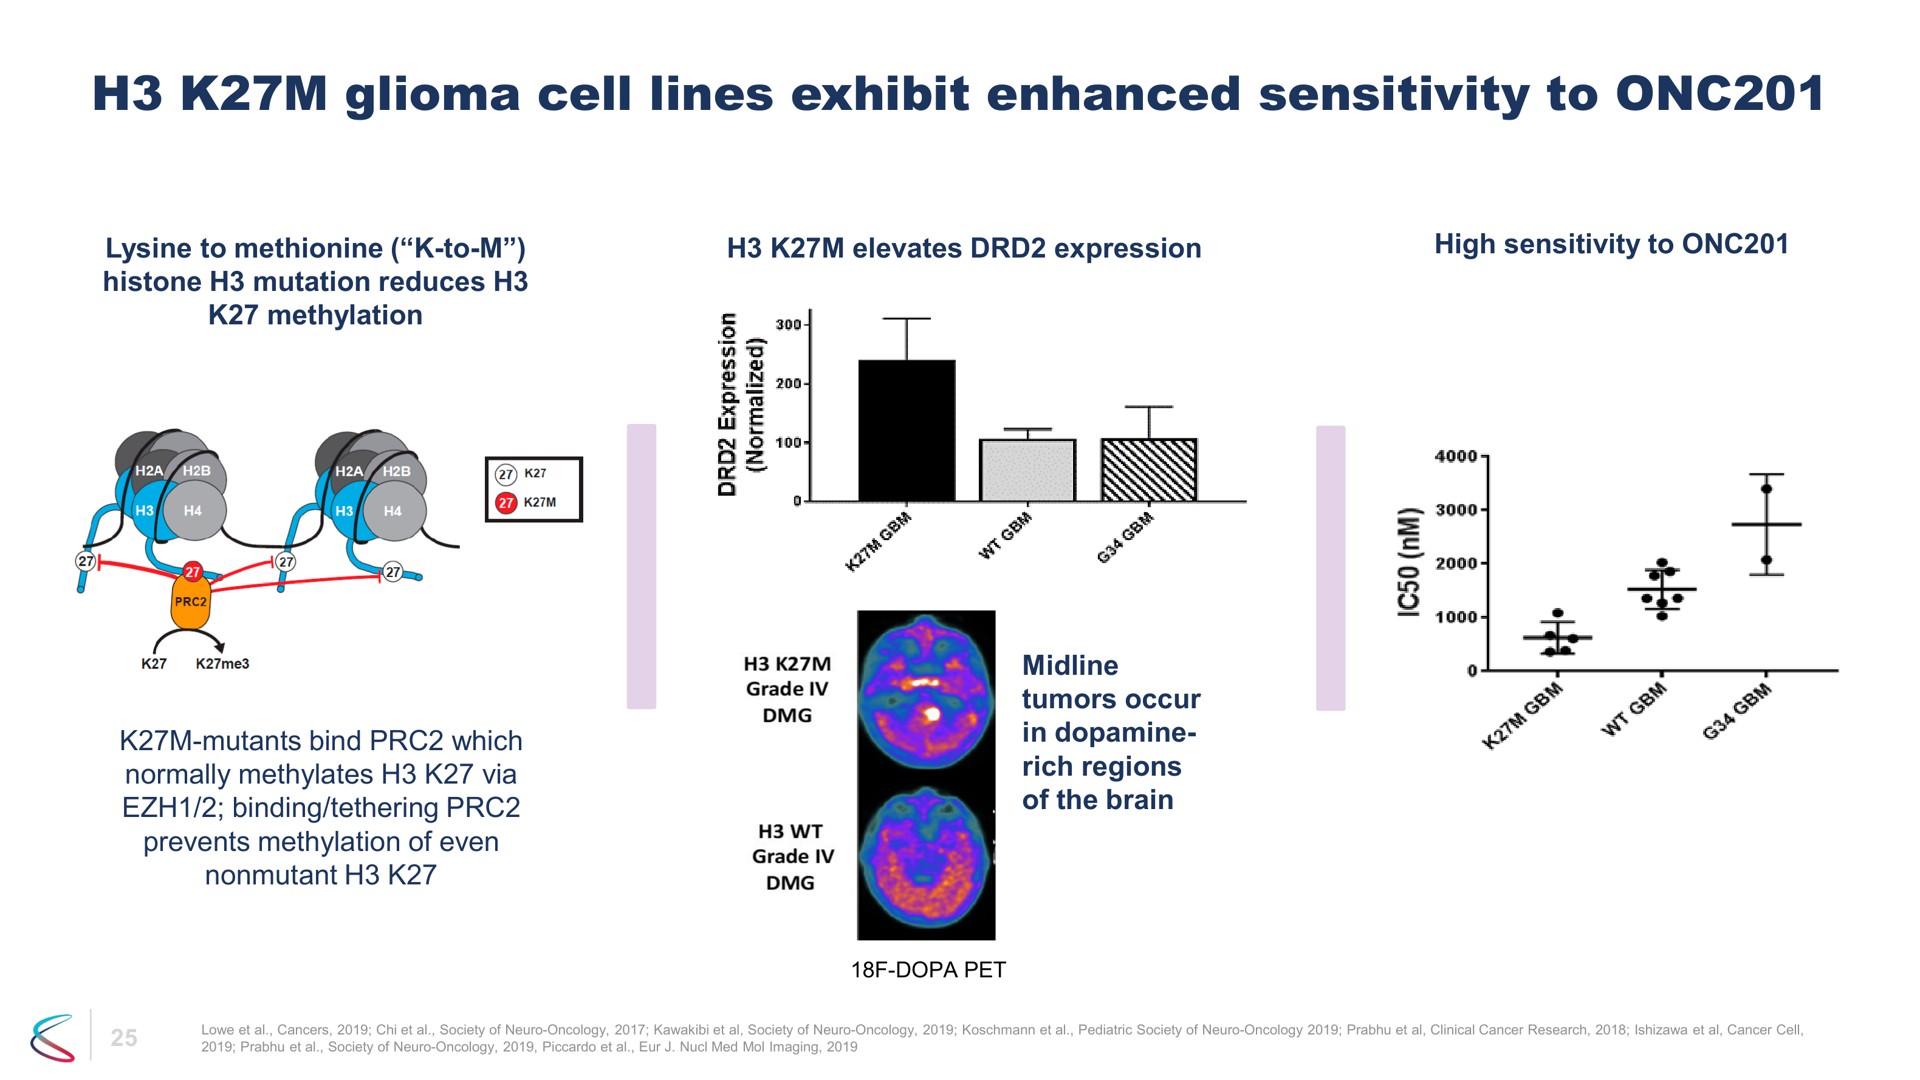 glioma cell lines exhibit enhanced sensitivity to mutants bind which in | Chimerix